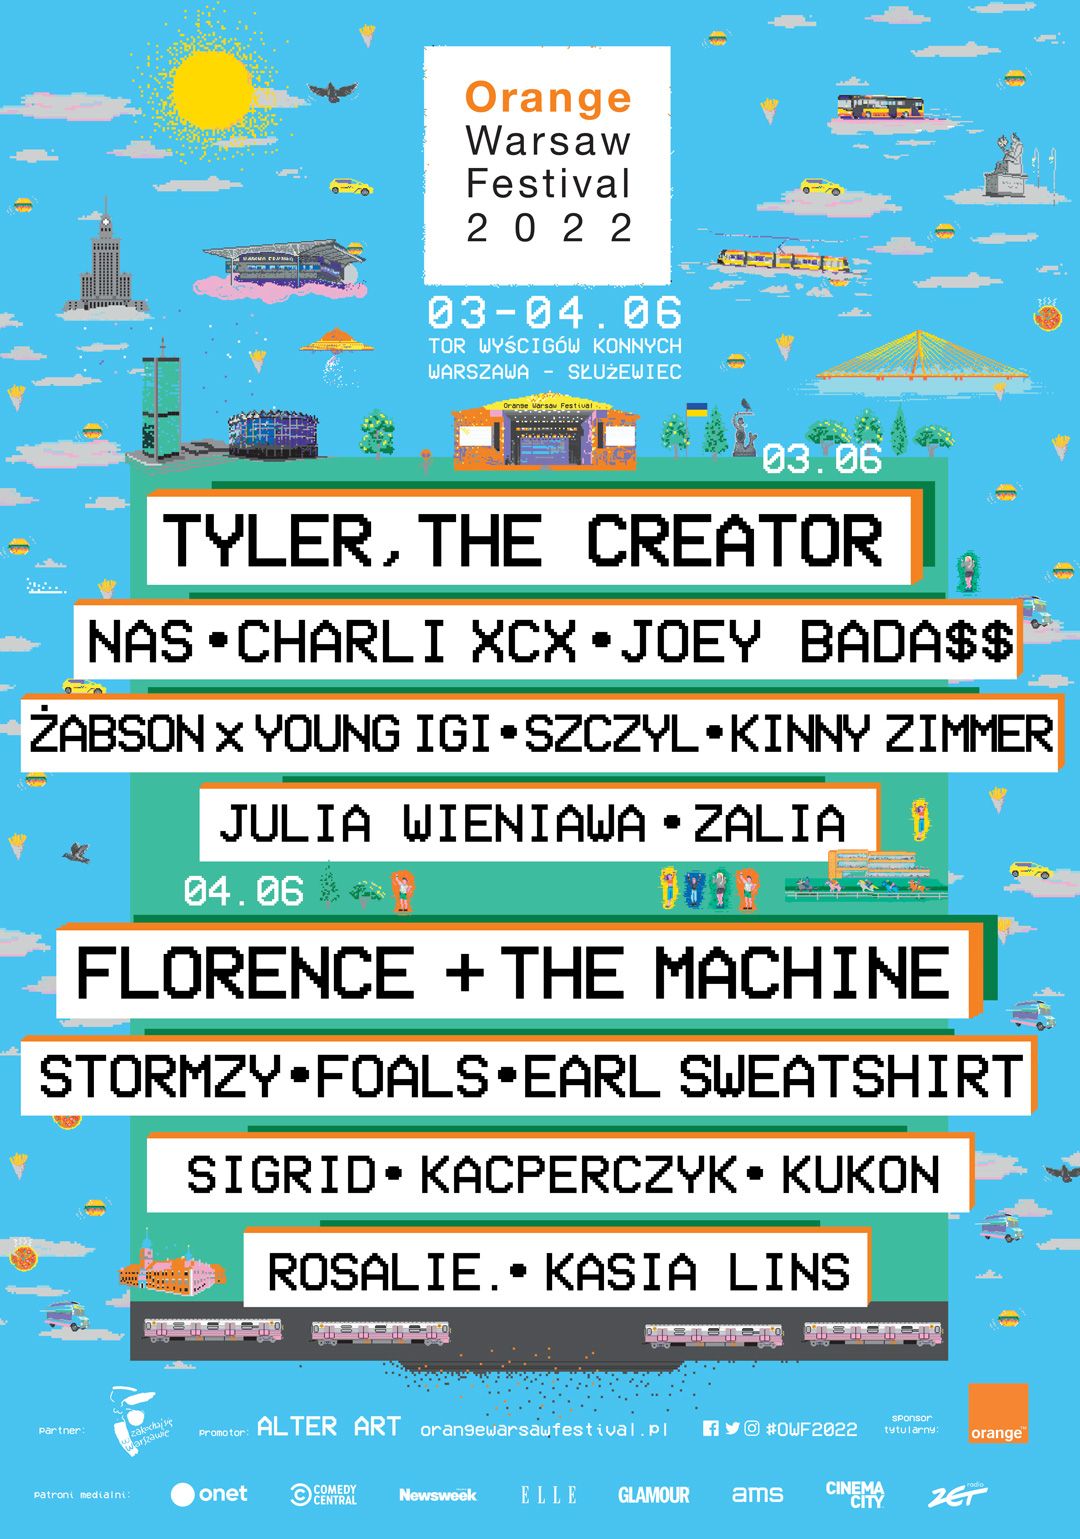 2022 line-up: Tyler, The Creator, Florence and the Machine, Charli XCX, Stormzy, Sigrid, Nas i inni